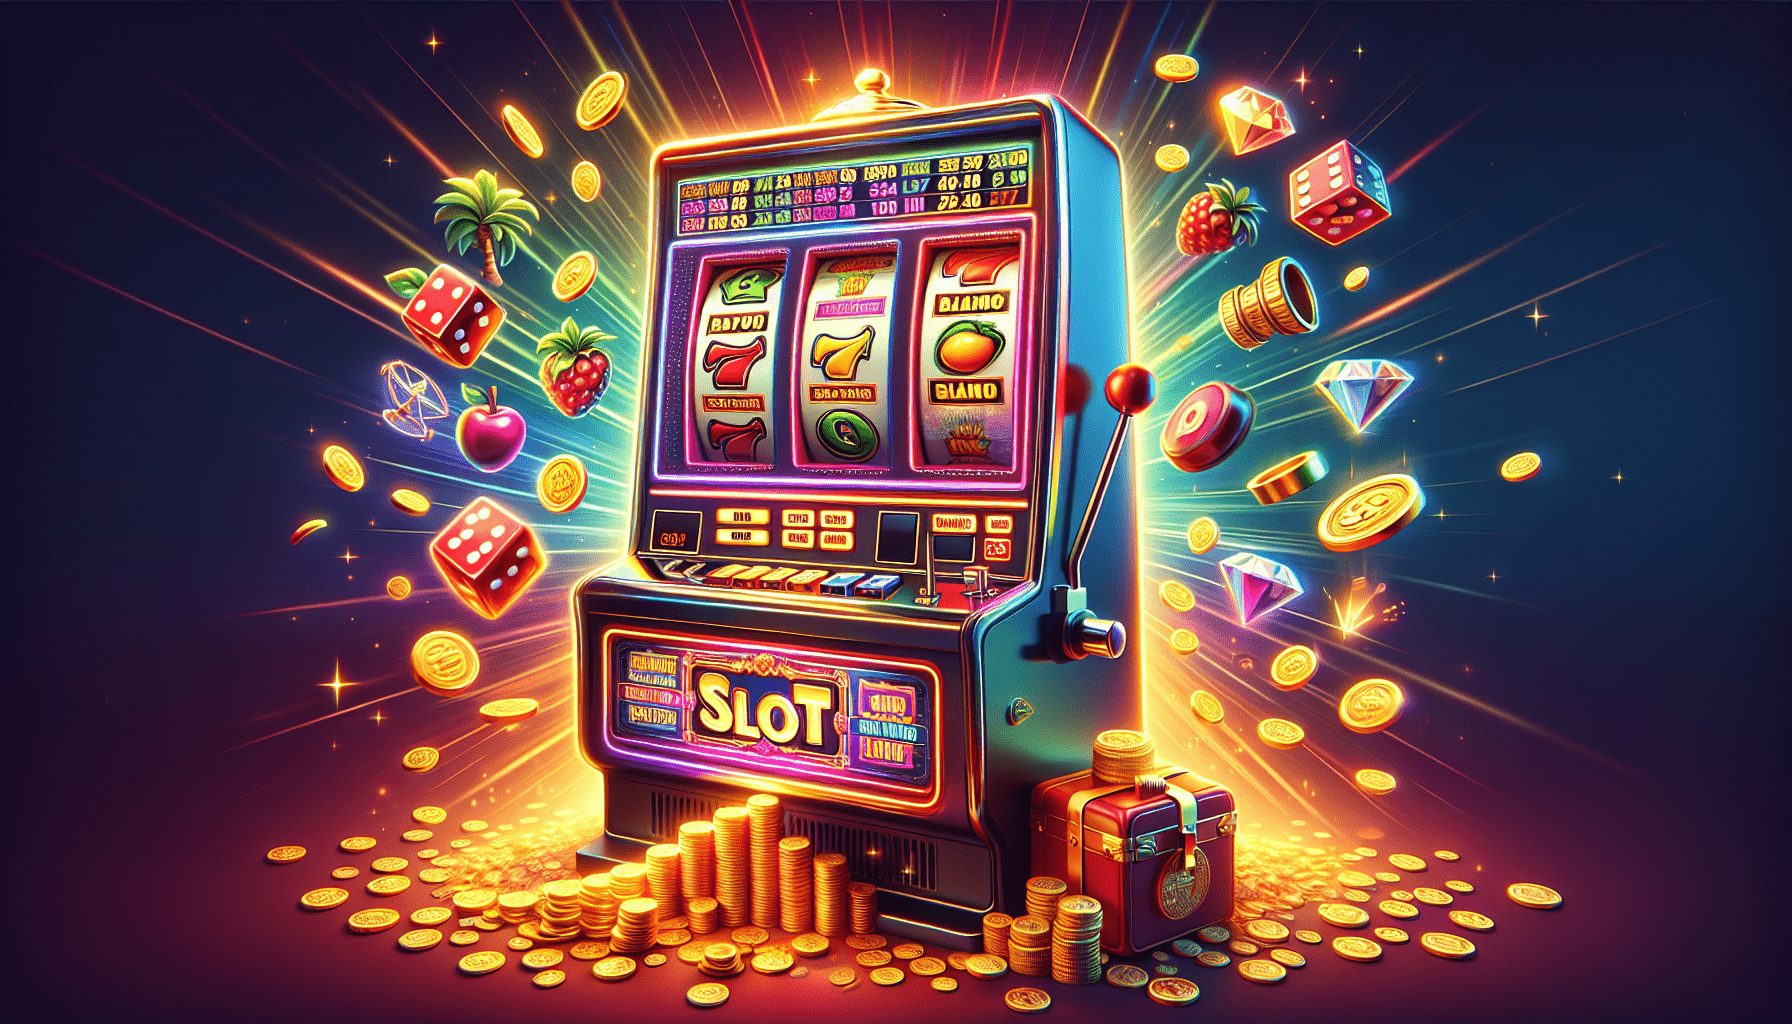 What Is The Most Successful Slot Machine?